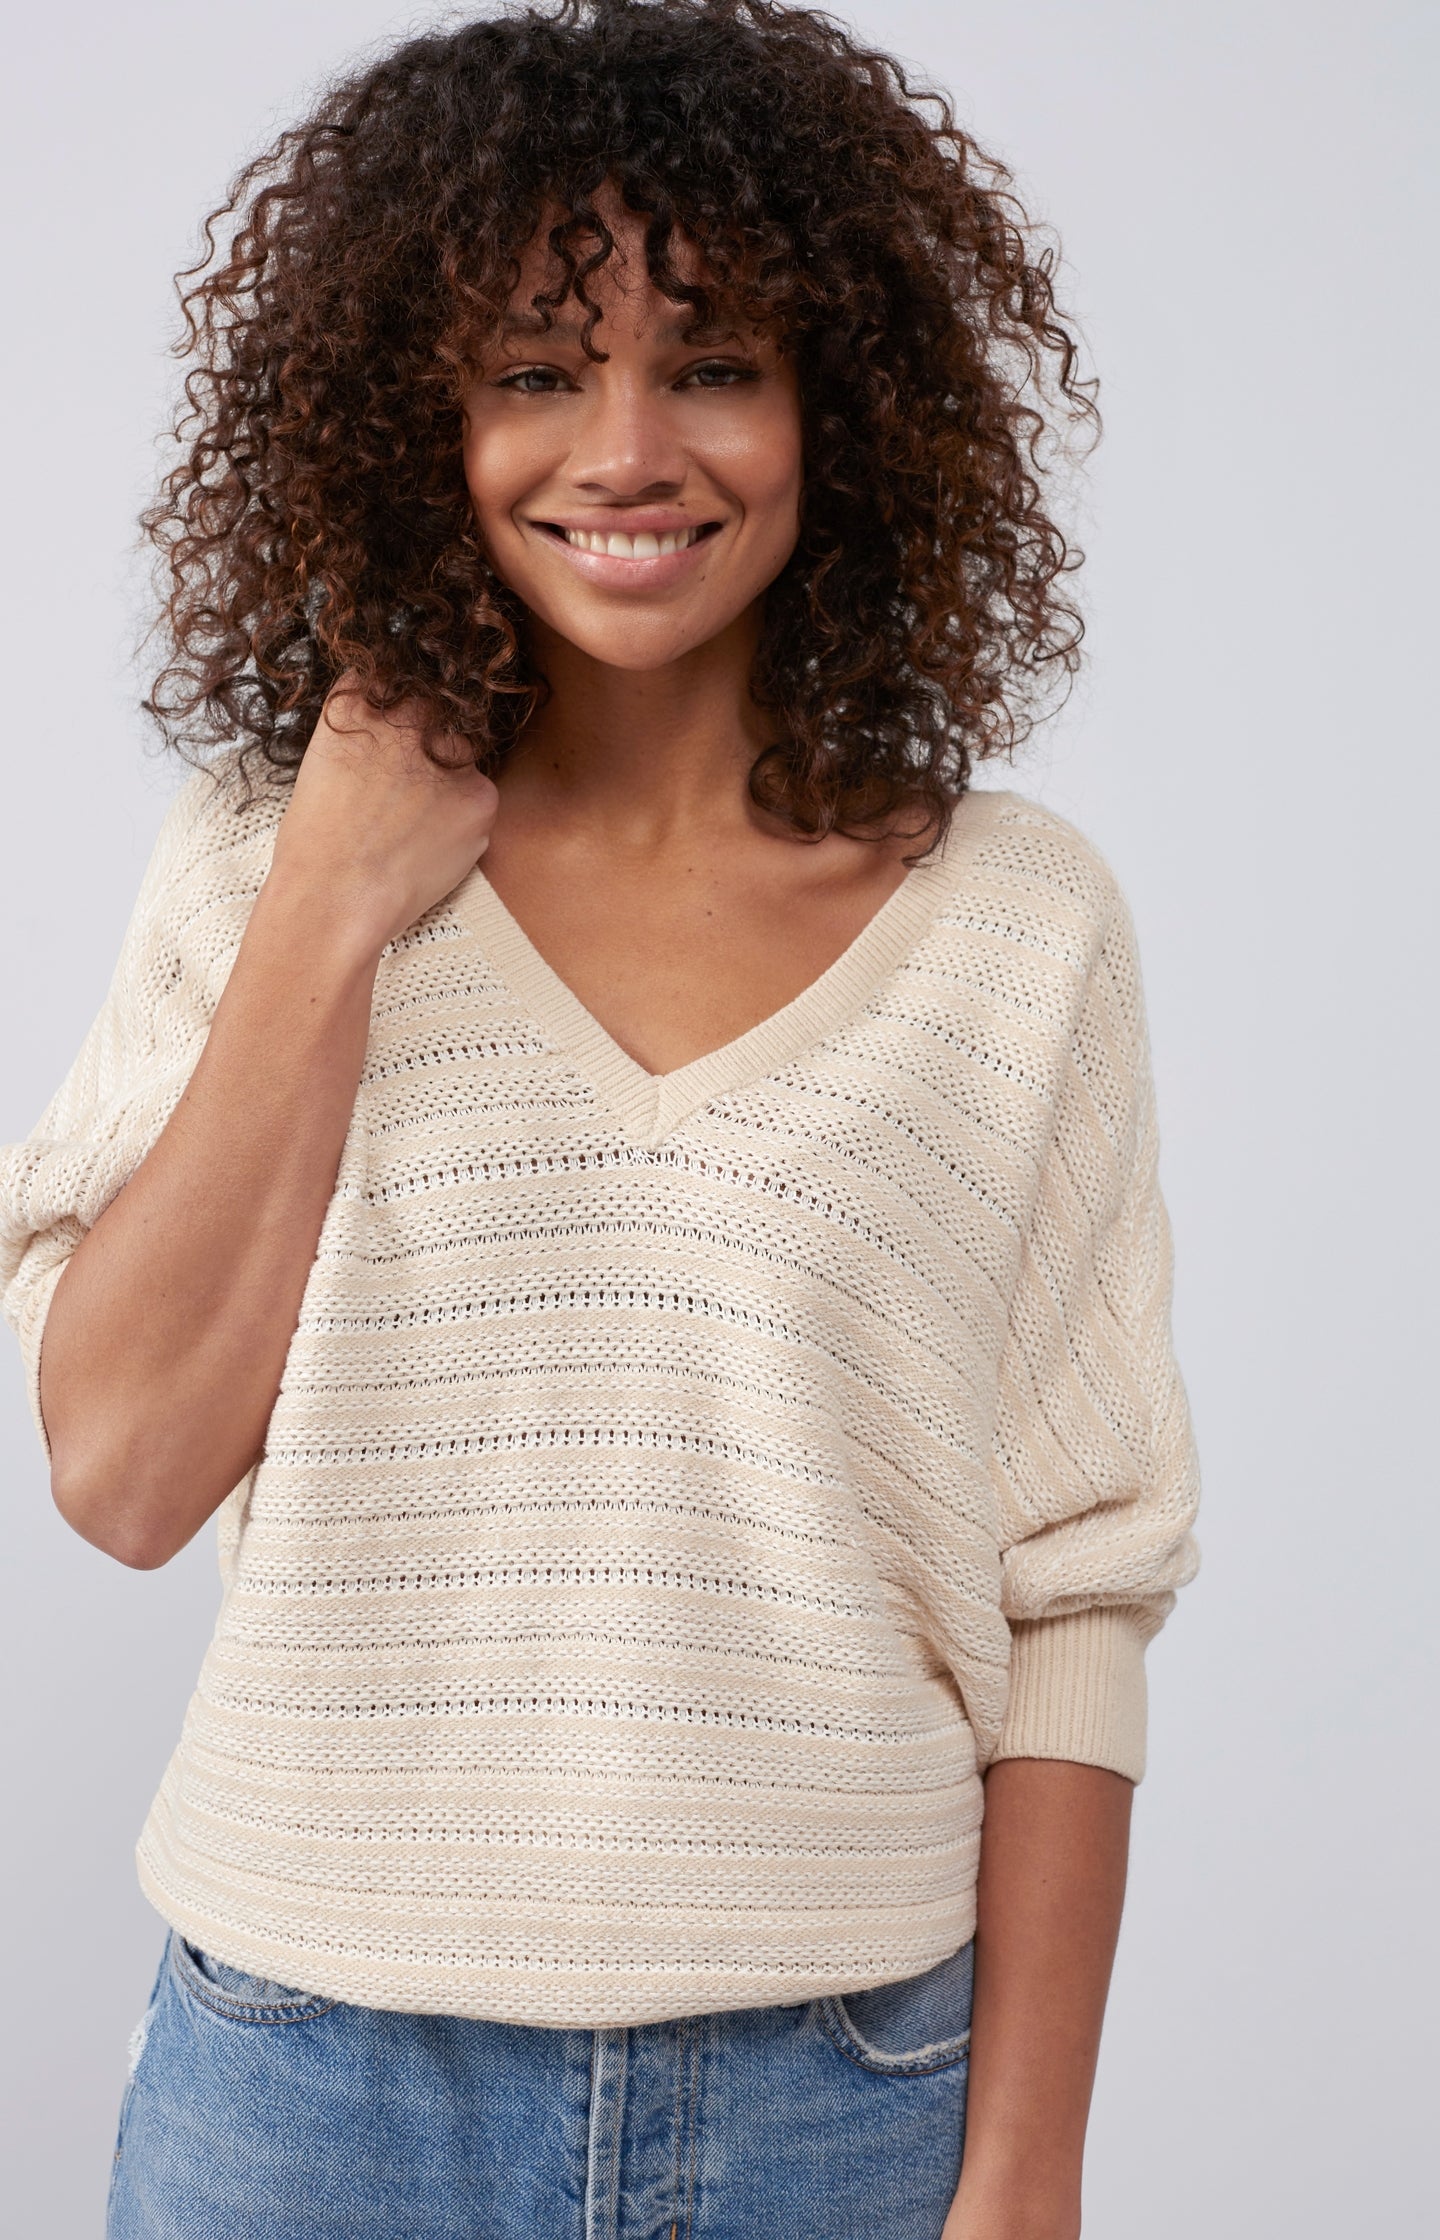 Double V-neck sweater with long sleeves and striped pattern